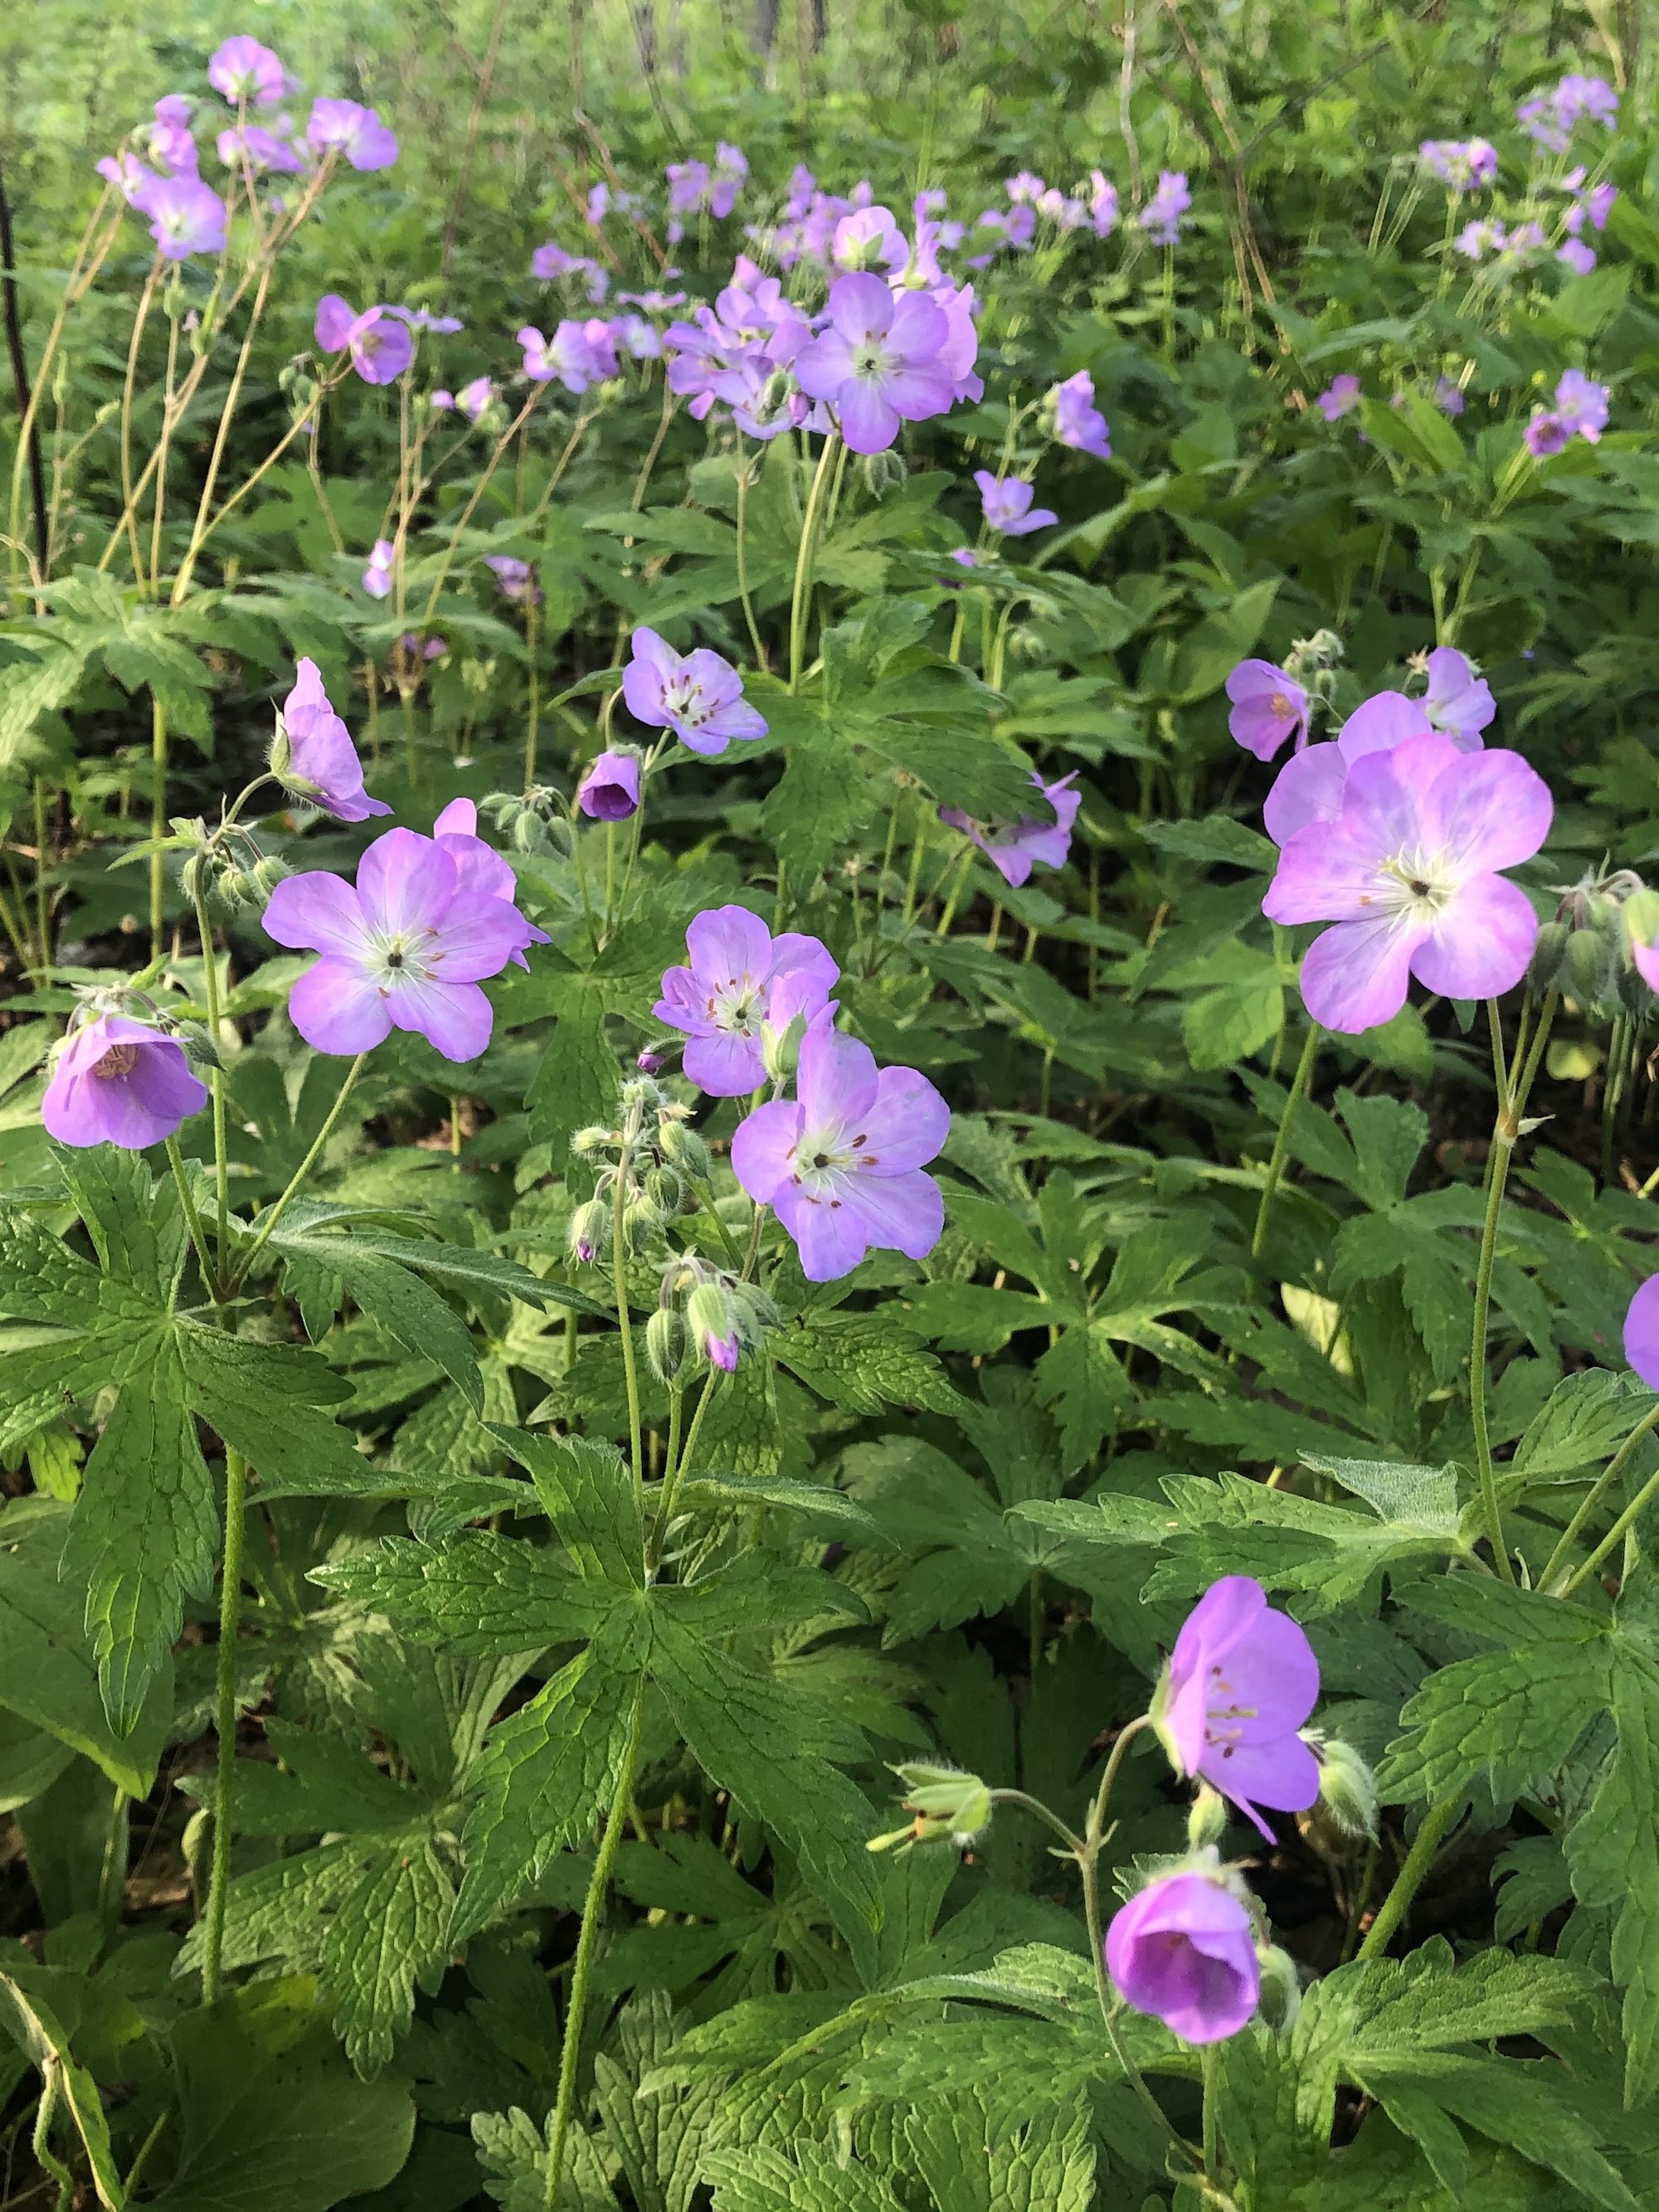 Wild Geranium by Council Ring in Oak Savanna on May 17, 2021.